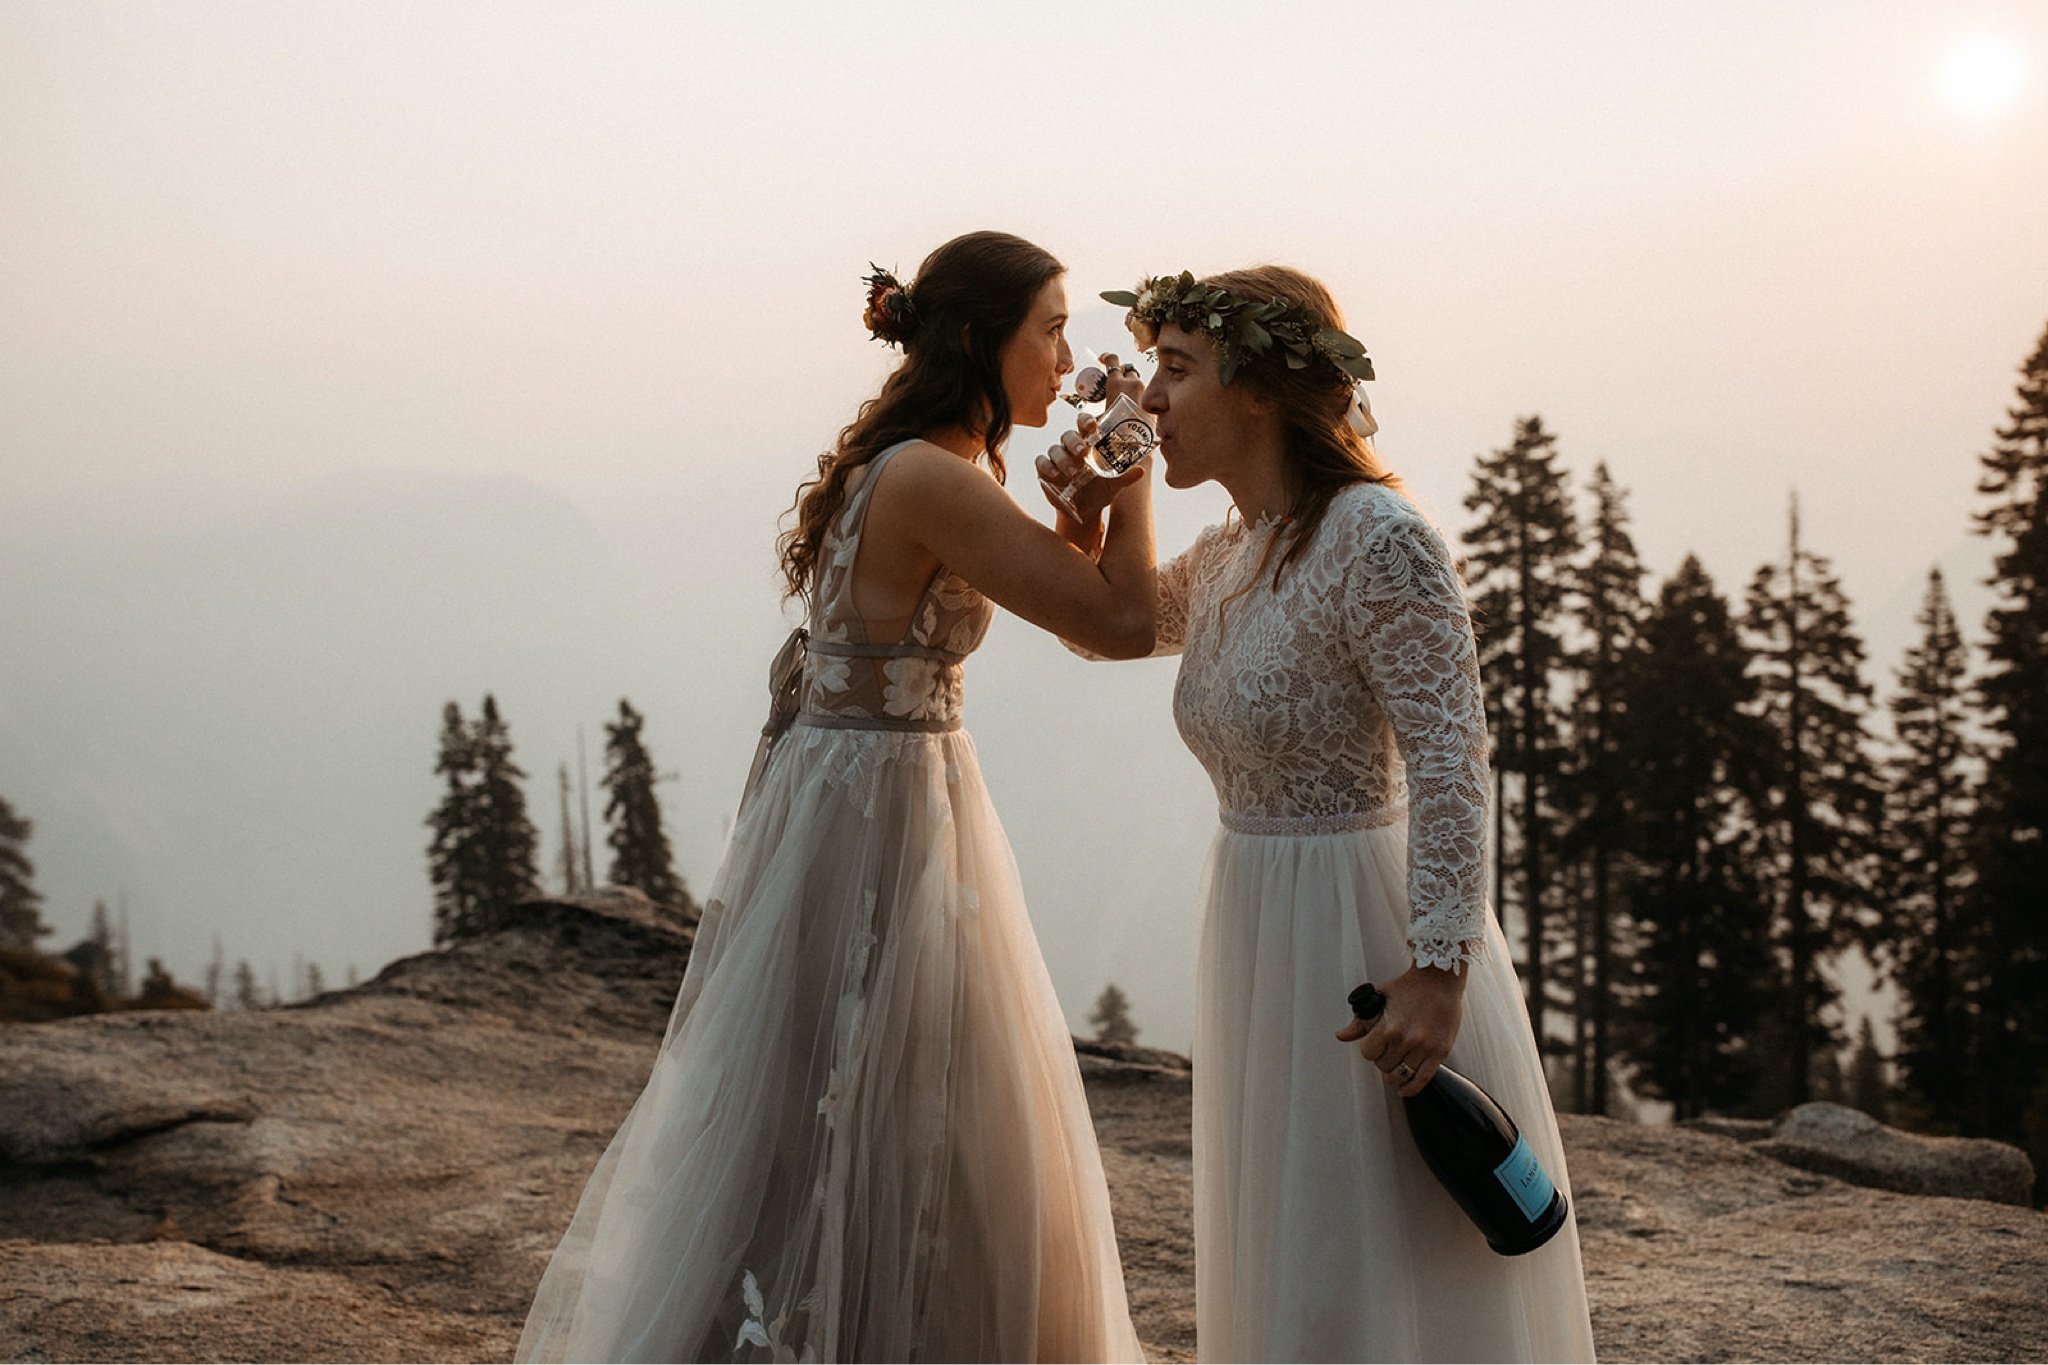 Yosemite National Park Elopement with Two Brides-Will Khoury83.jpg